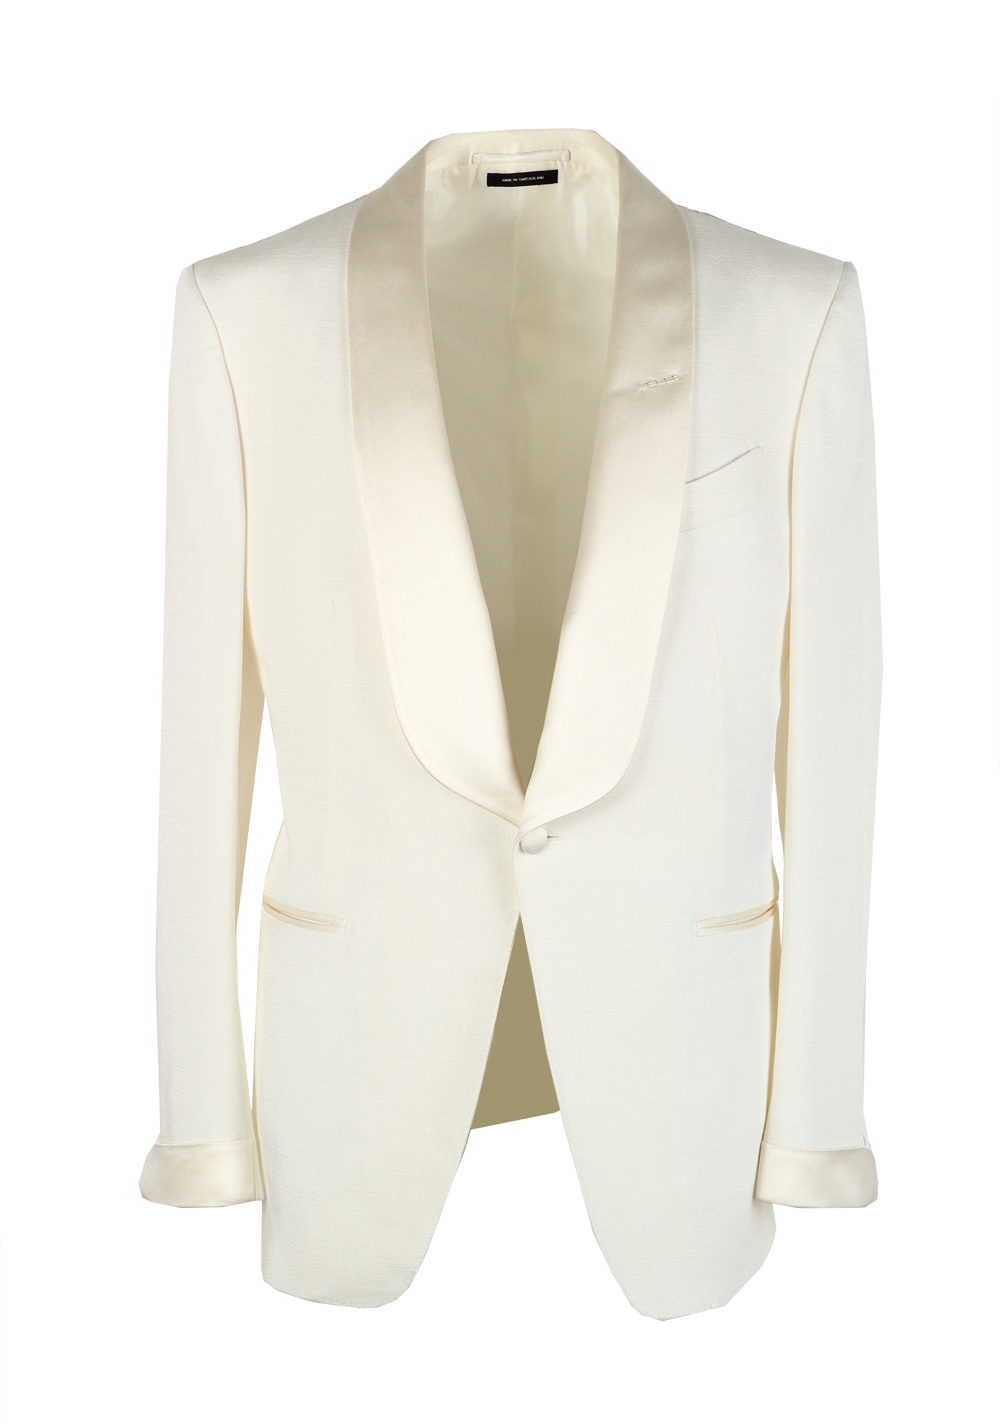 TOM FORD O’Connor Shawl Collar Ivory Sport Coat Tuxedo Dinner Jacket Size 50 / 40R U.S. Fit Y | Costume Limité